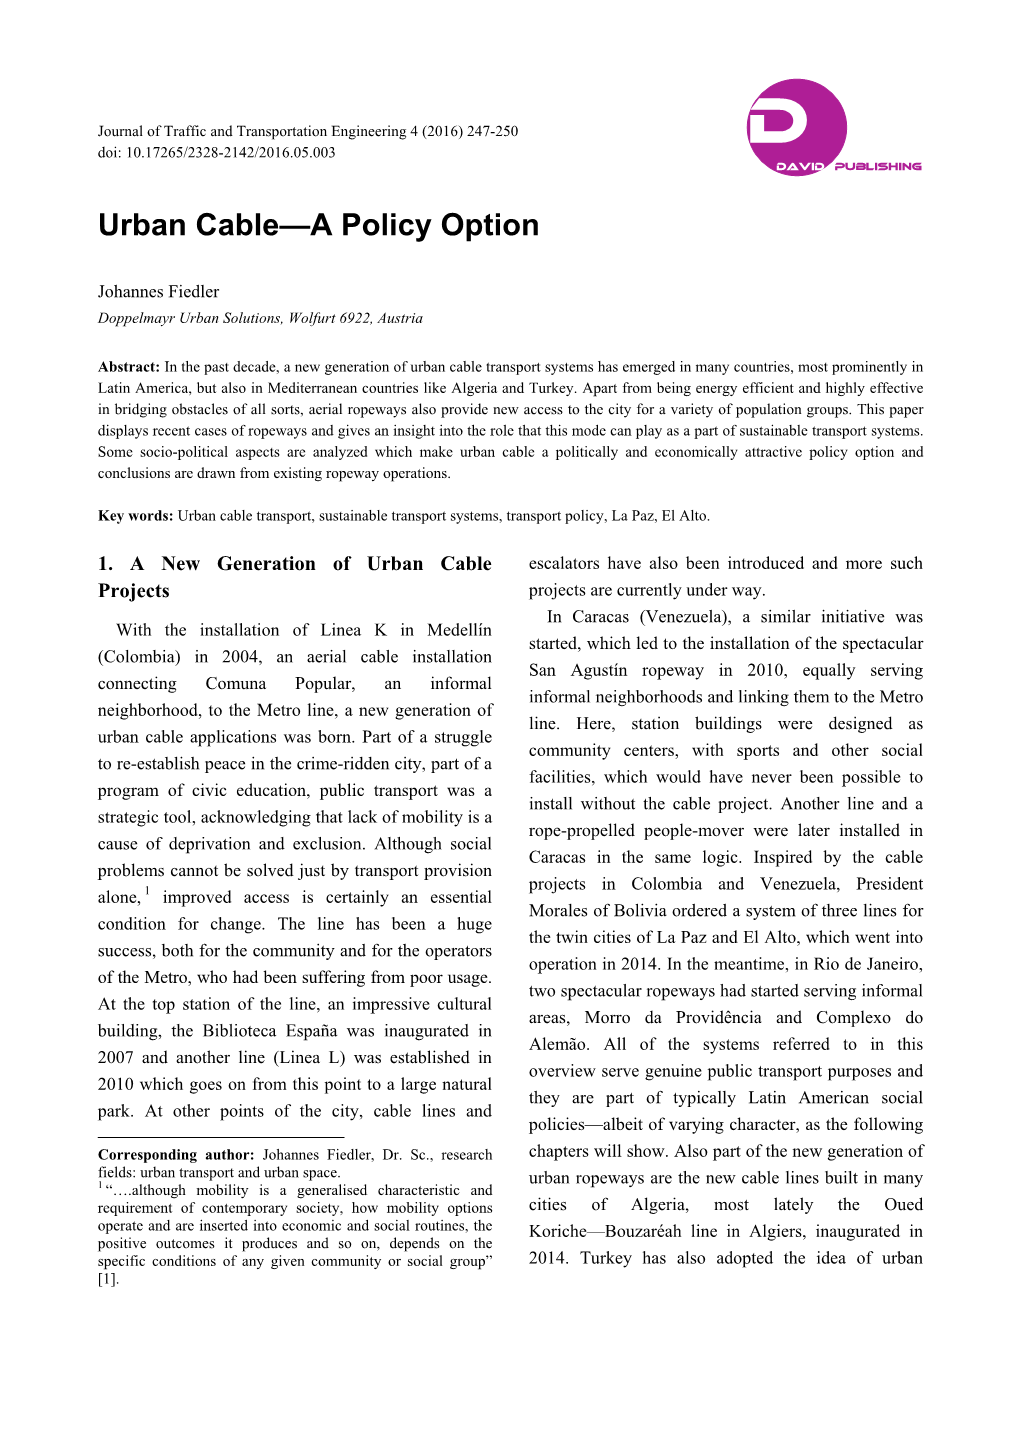 Urban Cable—A Policy Option